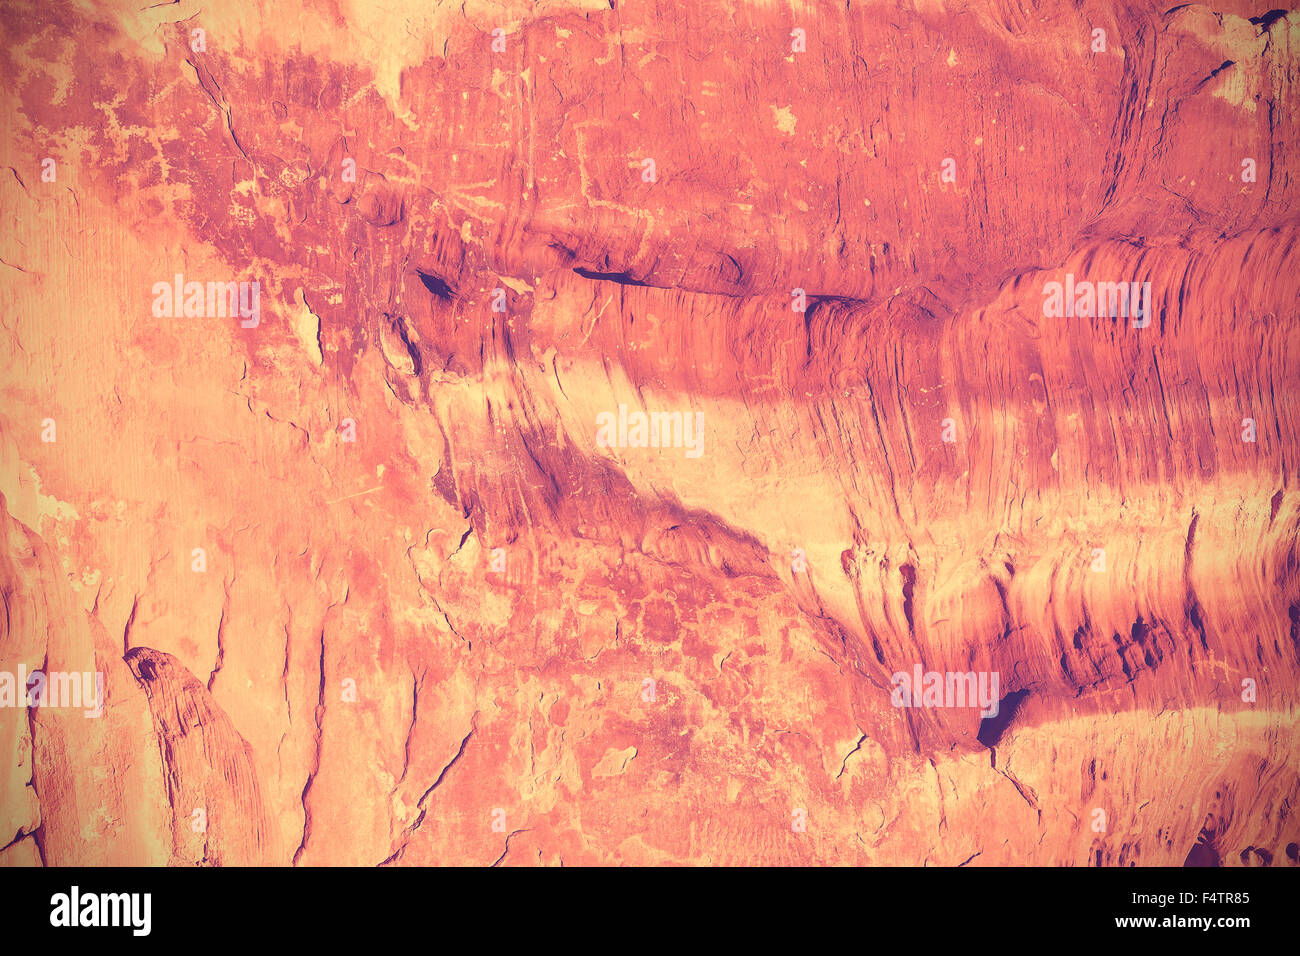 Natural rock surface background or texture. Stock Photo